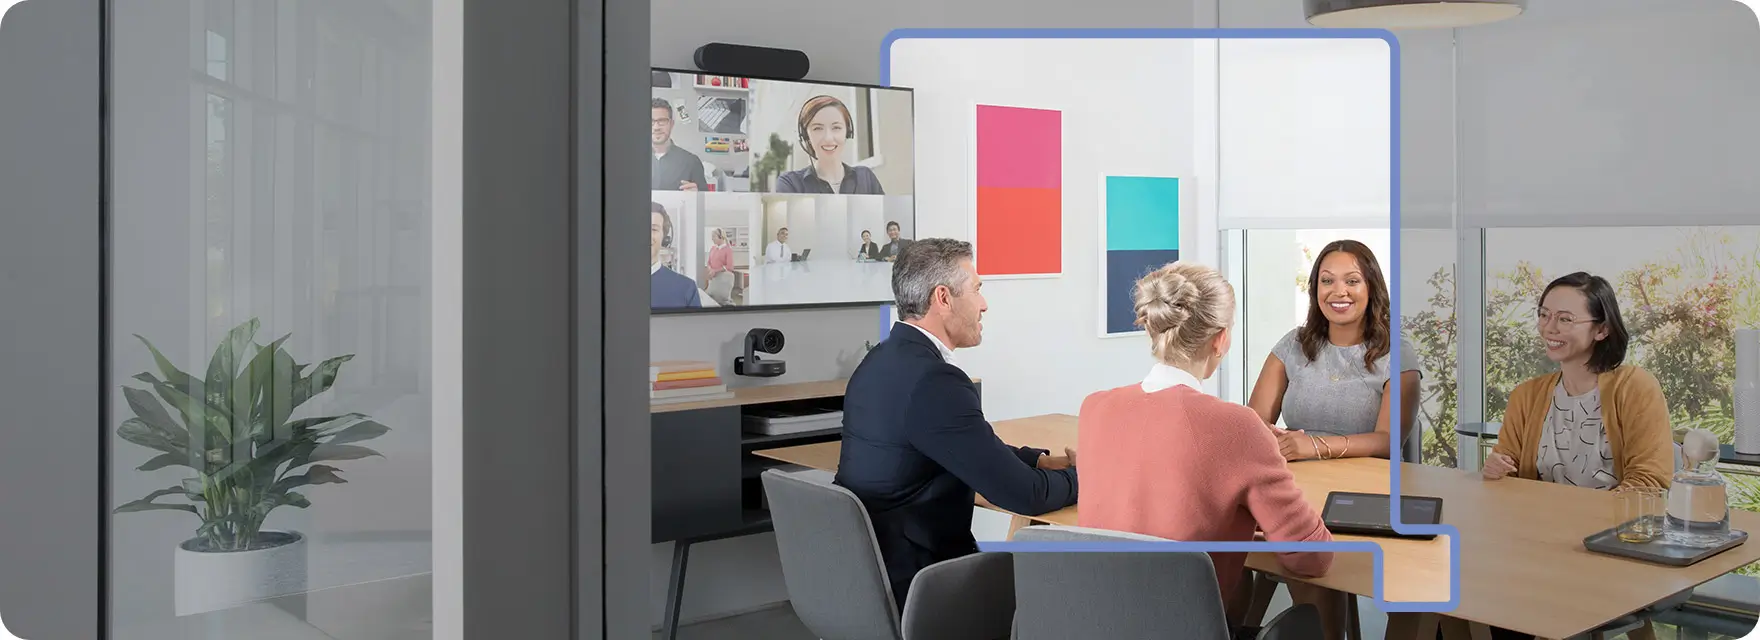 3 people video conferencing other team members presumably via Hybrid Workplace